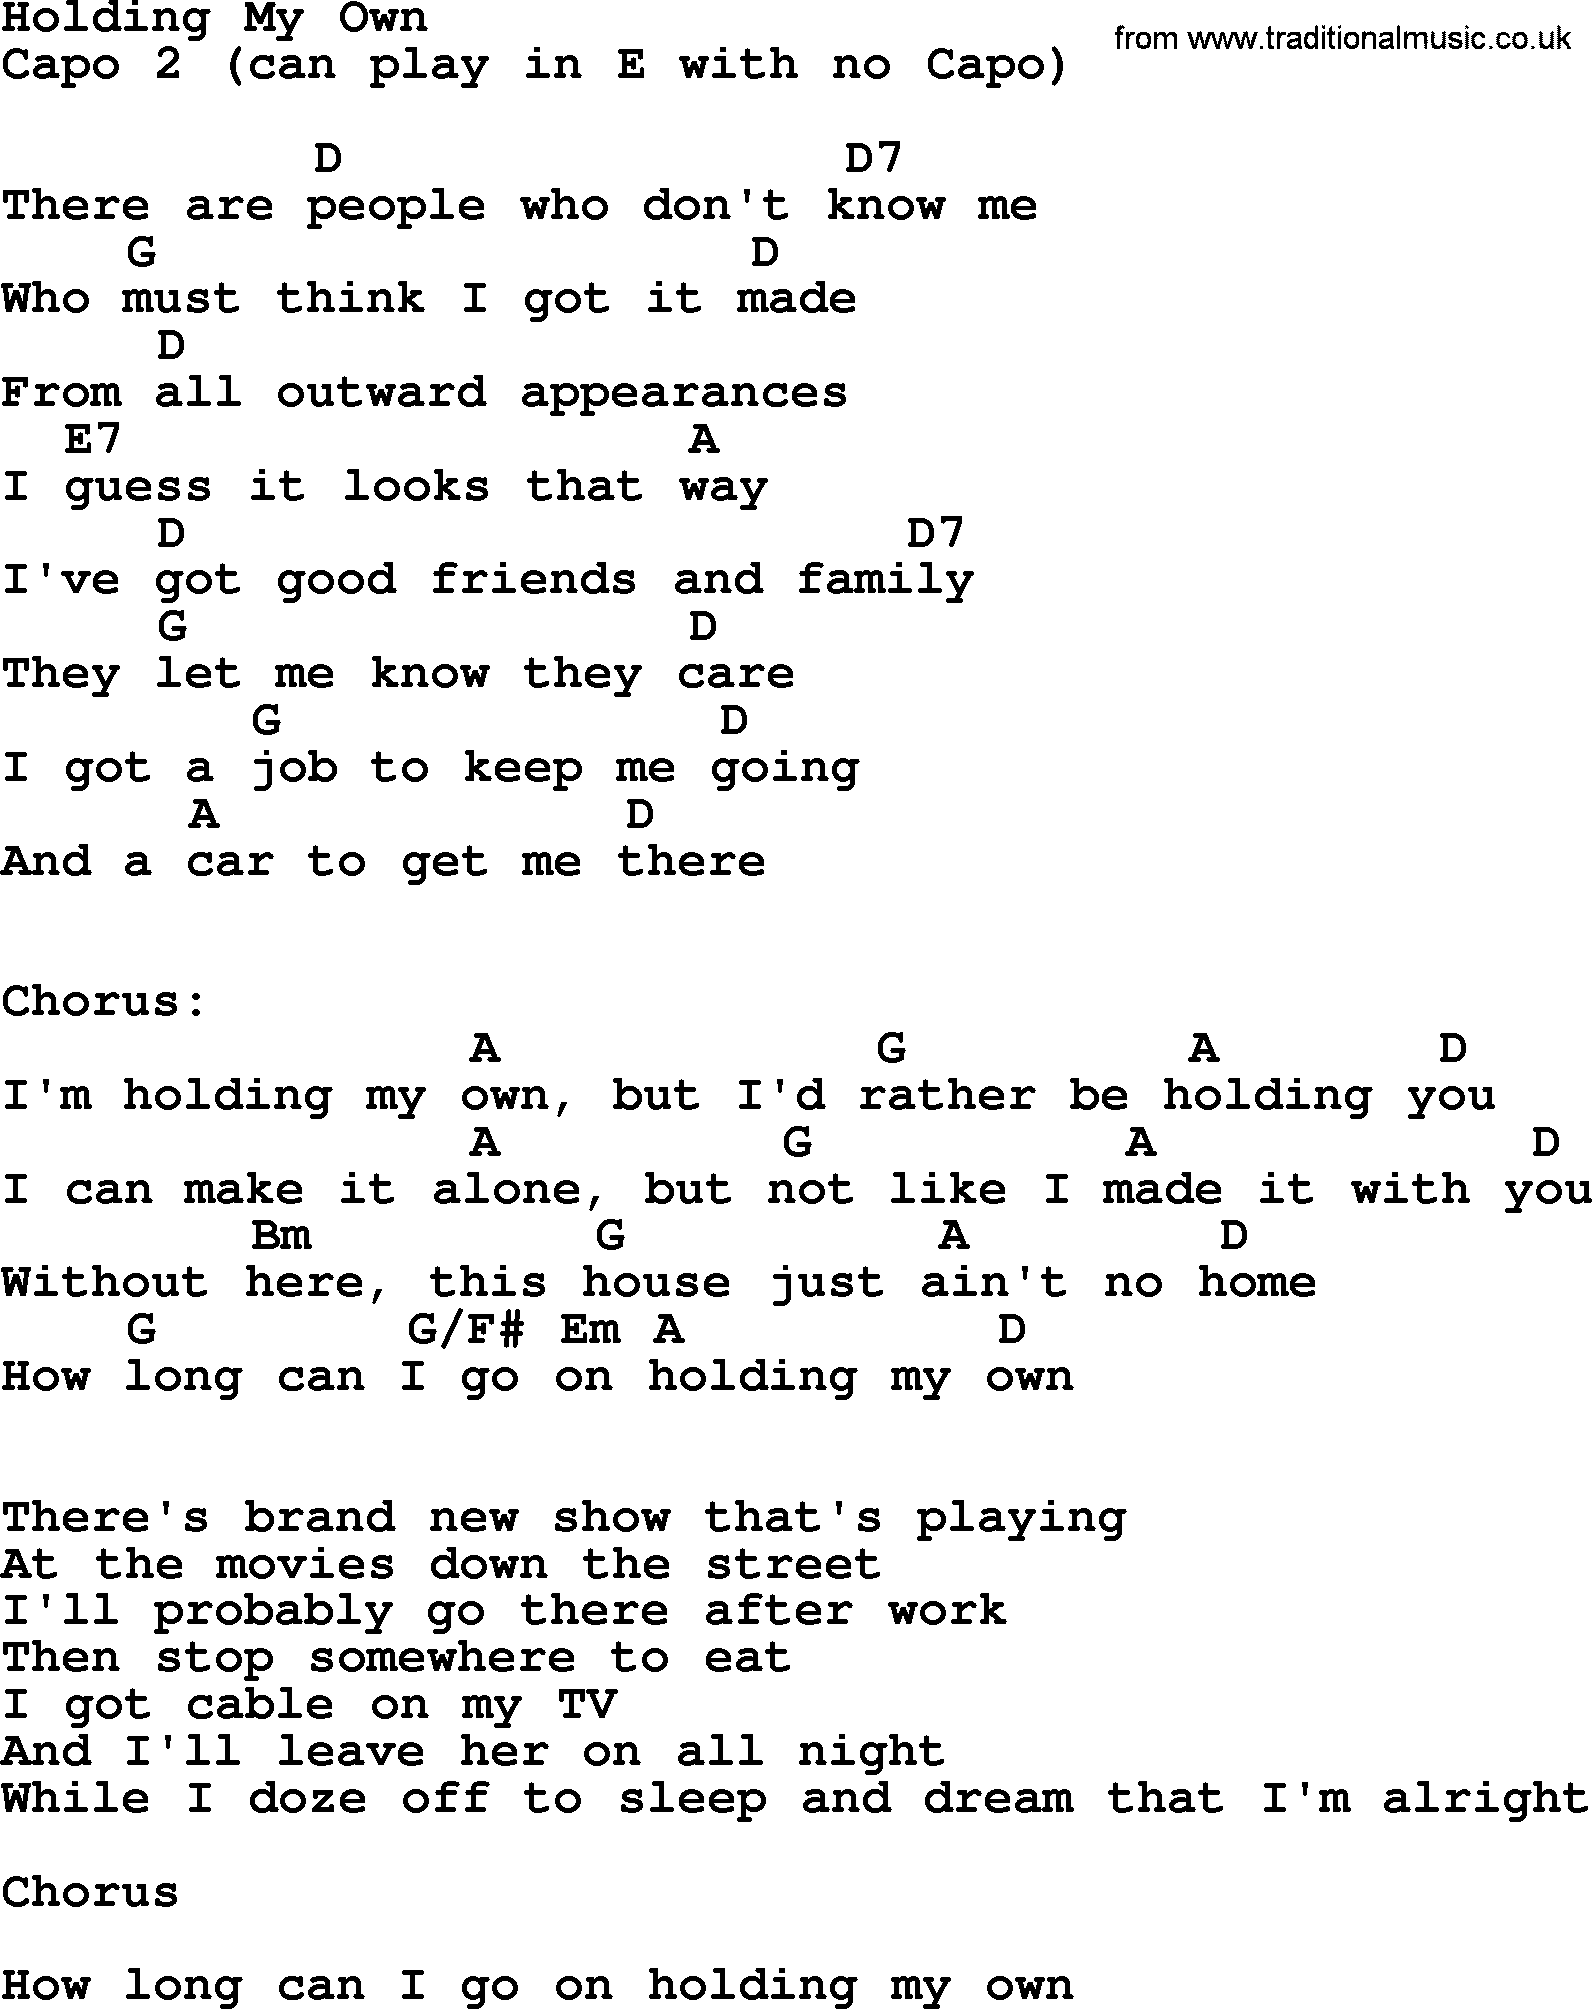 George Strait song: Holding My Own, lyrics and chords